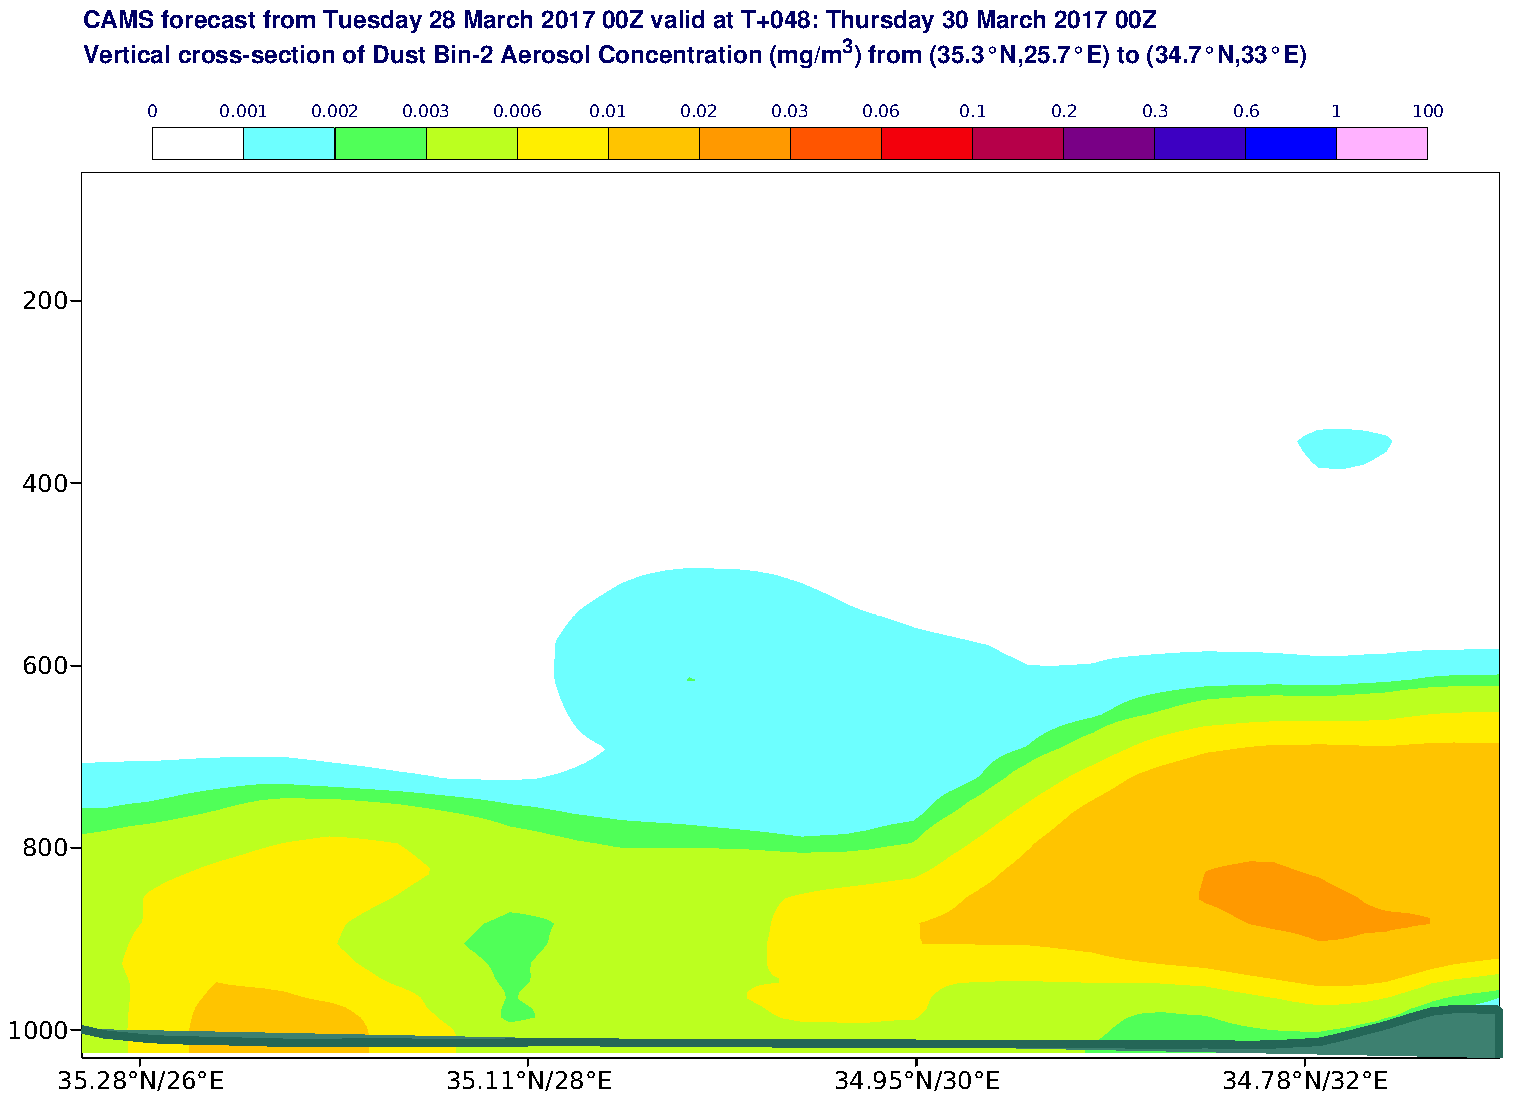 Vertical cross-section of Dust Bin-2 Aerosol Concentration (mg/m3) valid at T48 - 2017-03-30 00:00